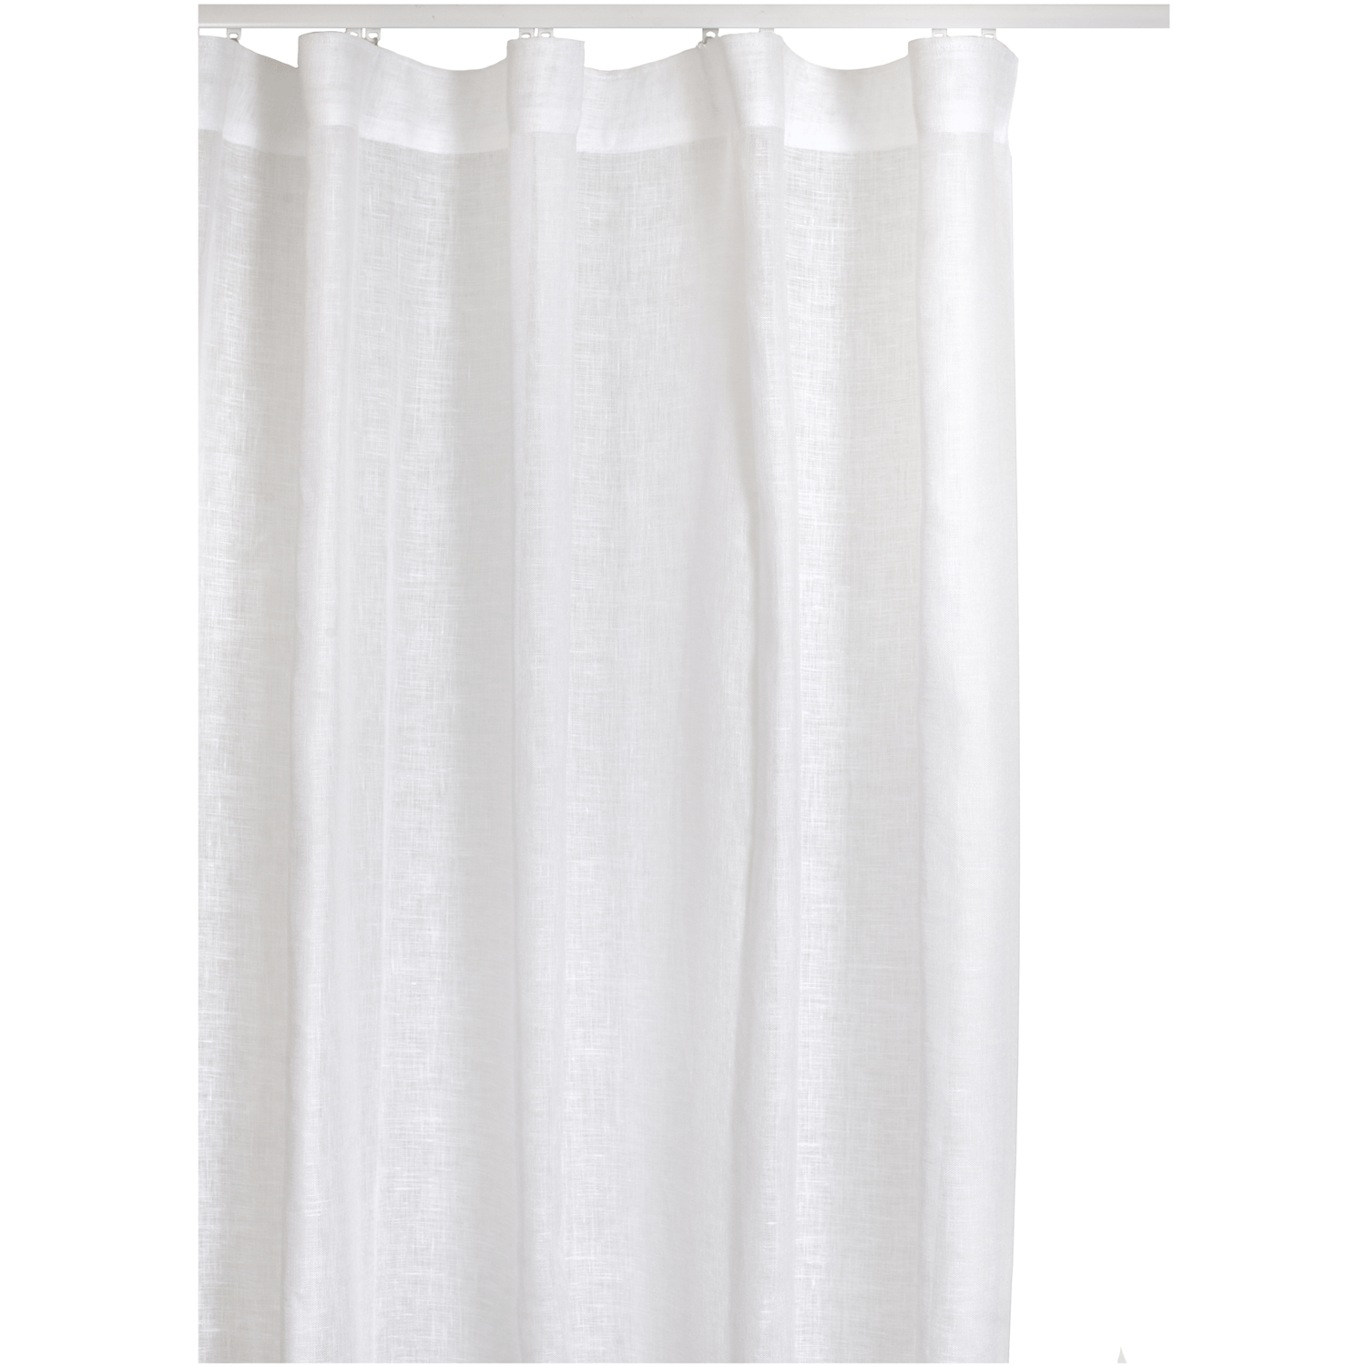 Skylight Curtain With Gathering Tape 140x250 cm, White